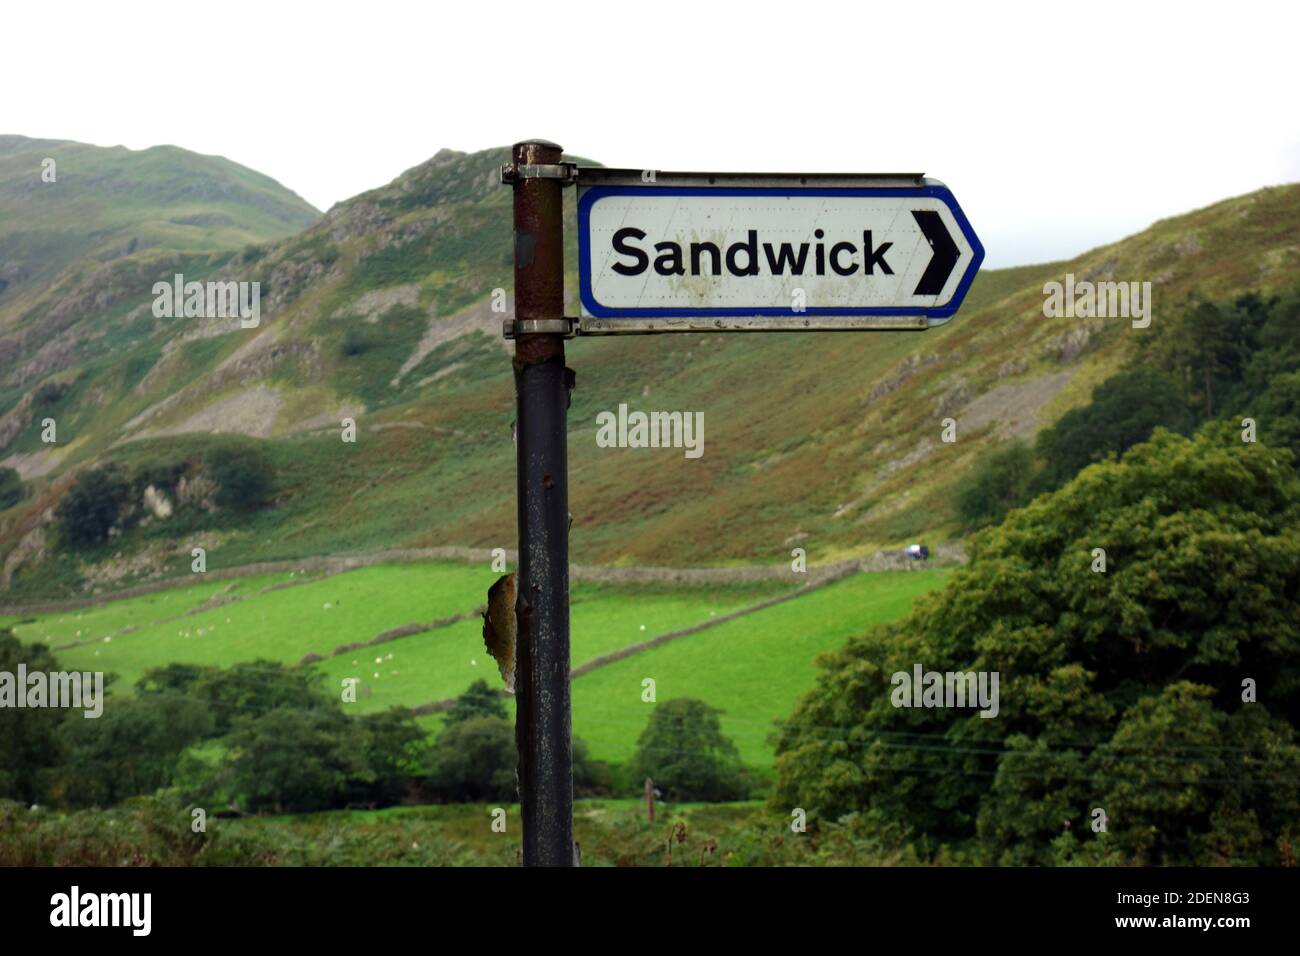 The Wainwright 'Beda Fell' & Metal Road Sign for the Hamlet of Sandwick on a Single Track Road in Martindale, Lake District National Park, Cumbria. Stock Photo